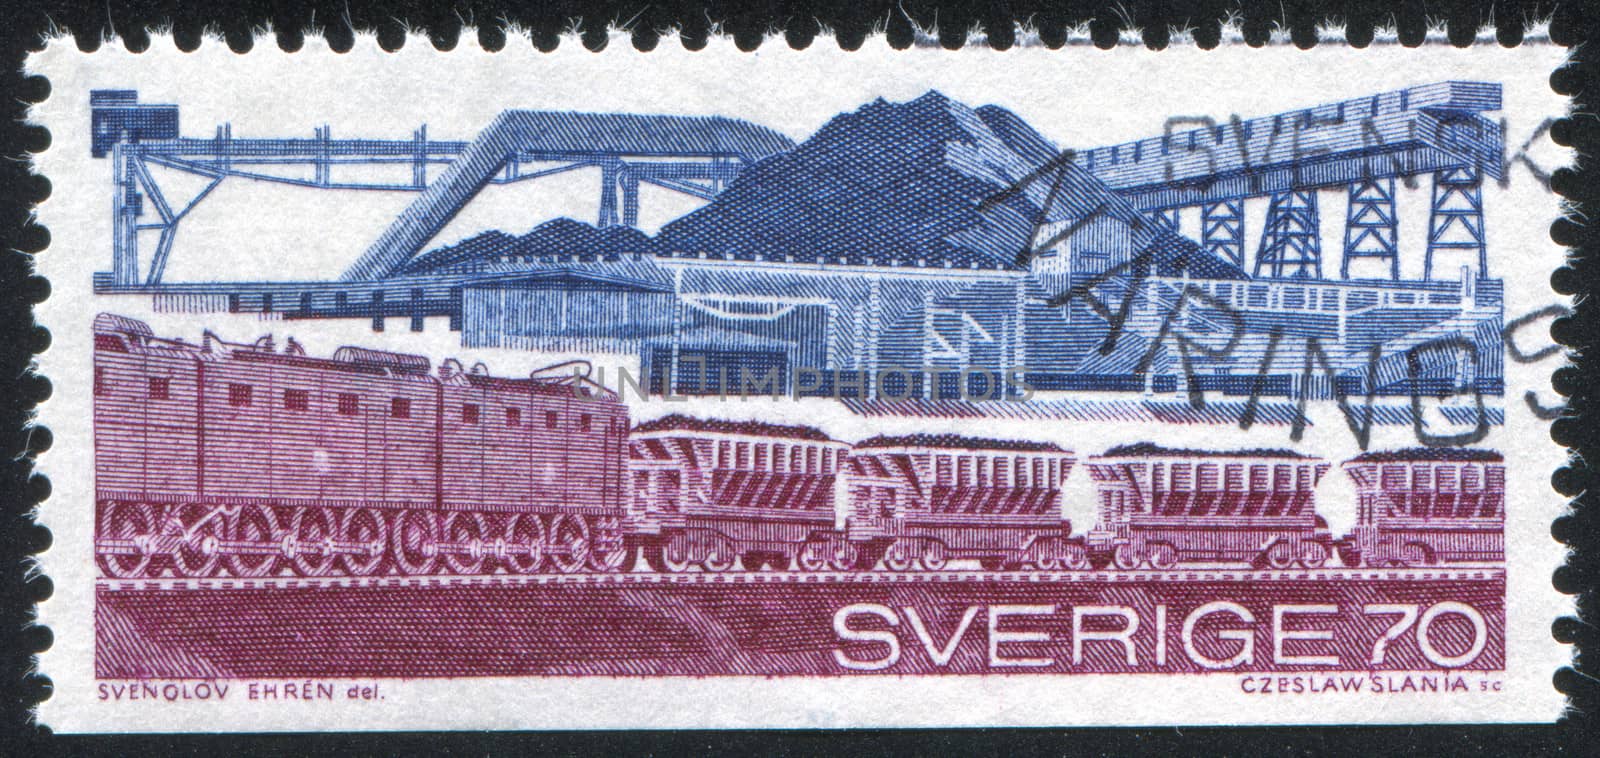 SWEDEN - CIRCA 1970: stamp printed by Sweden, shows freight train and mine, circa 1970